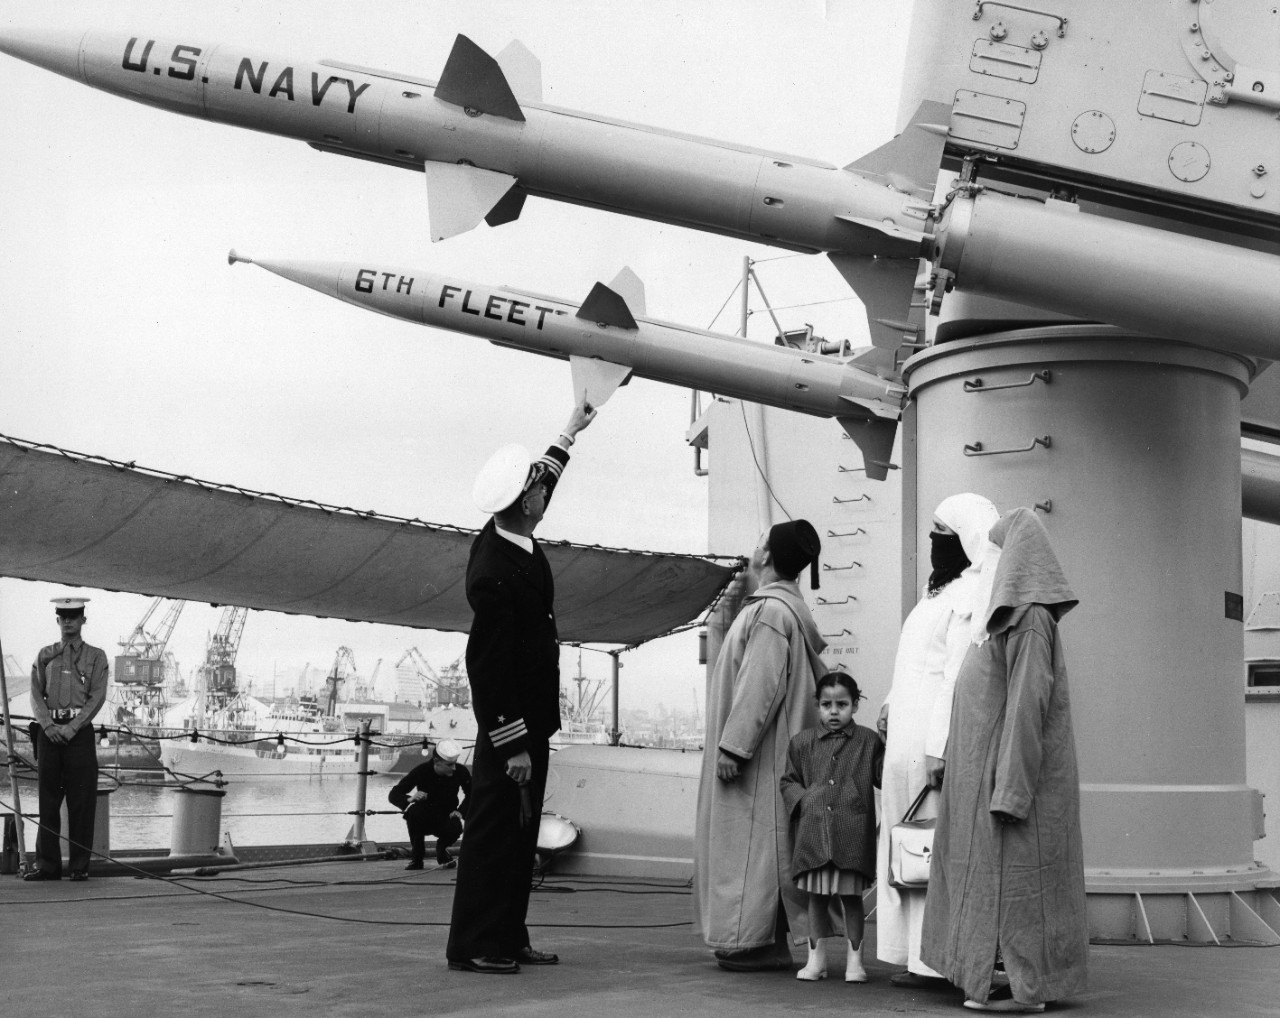 Modern missiles hang above Moroccans wearing traditional clothing, as Commander Travis O. Tabor III, Executive Officer of USS Springfield (CLG-7) explains the workings of the Terrier missile, during a Sixth Fleet visit to Casablanca.